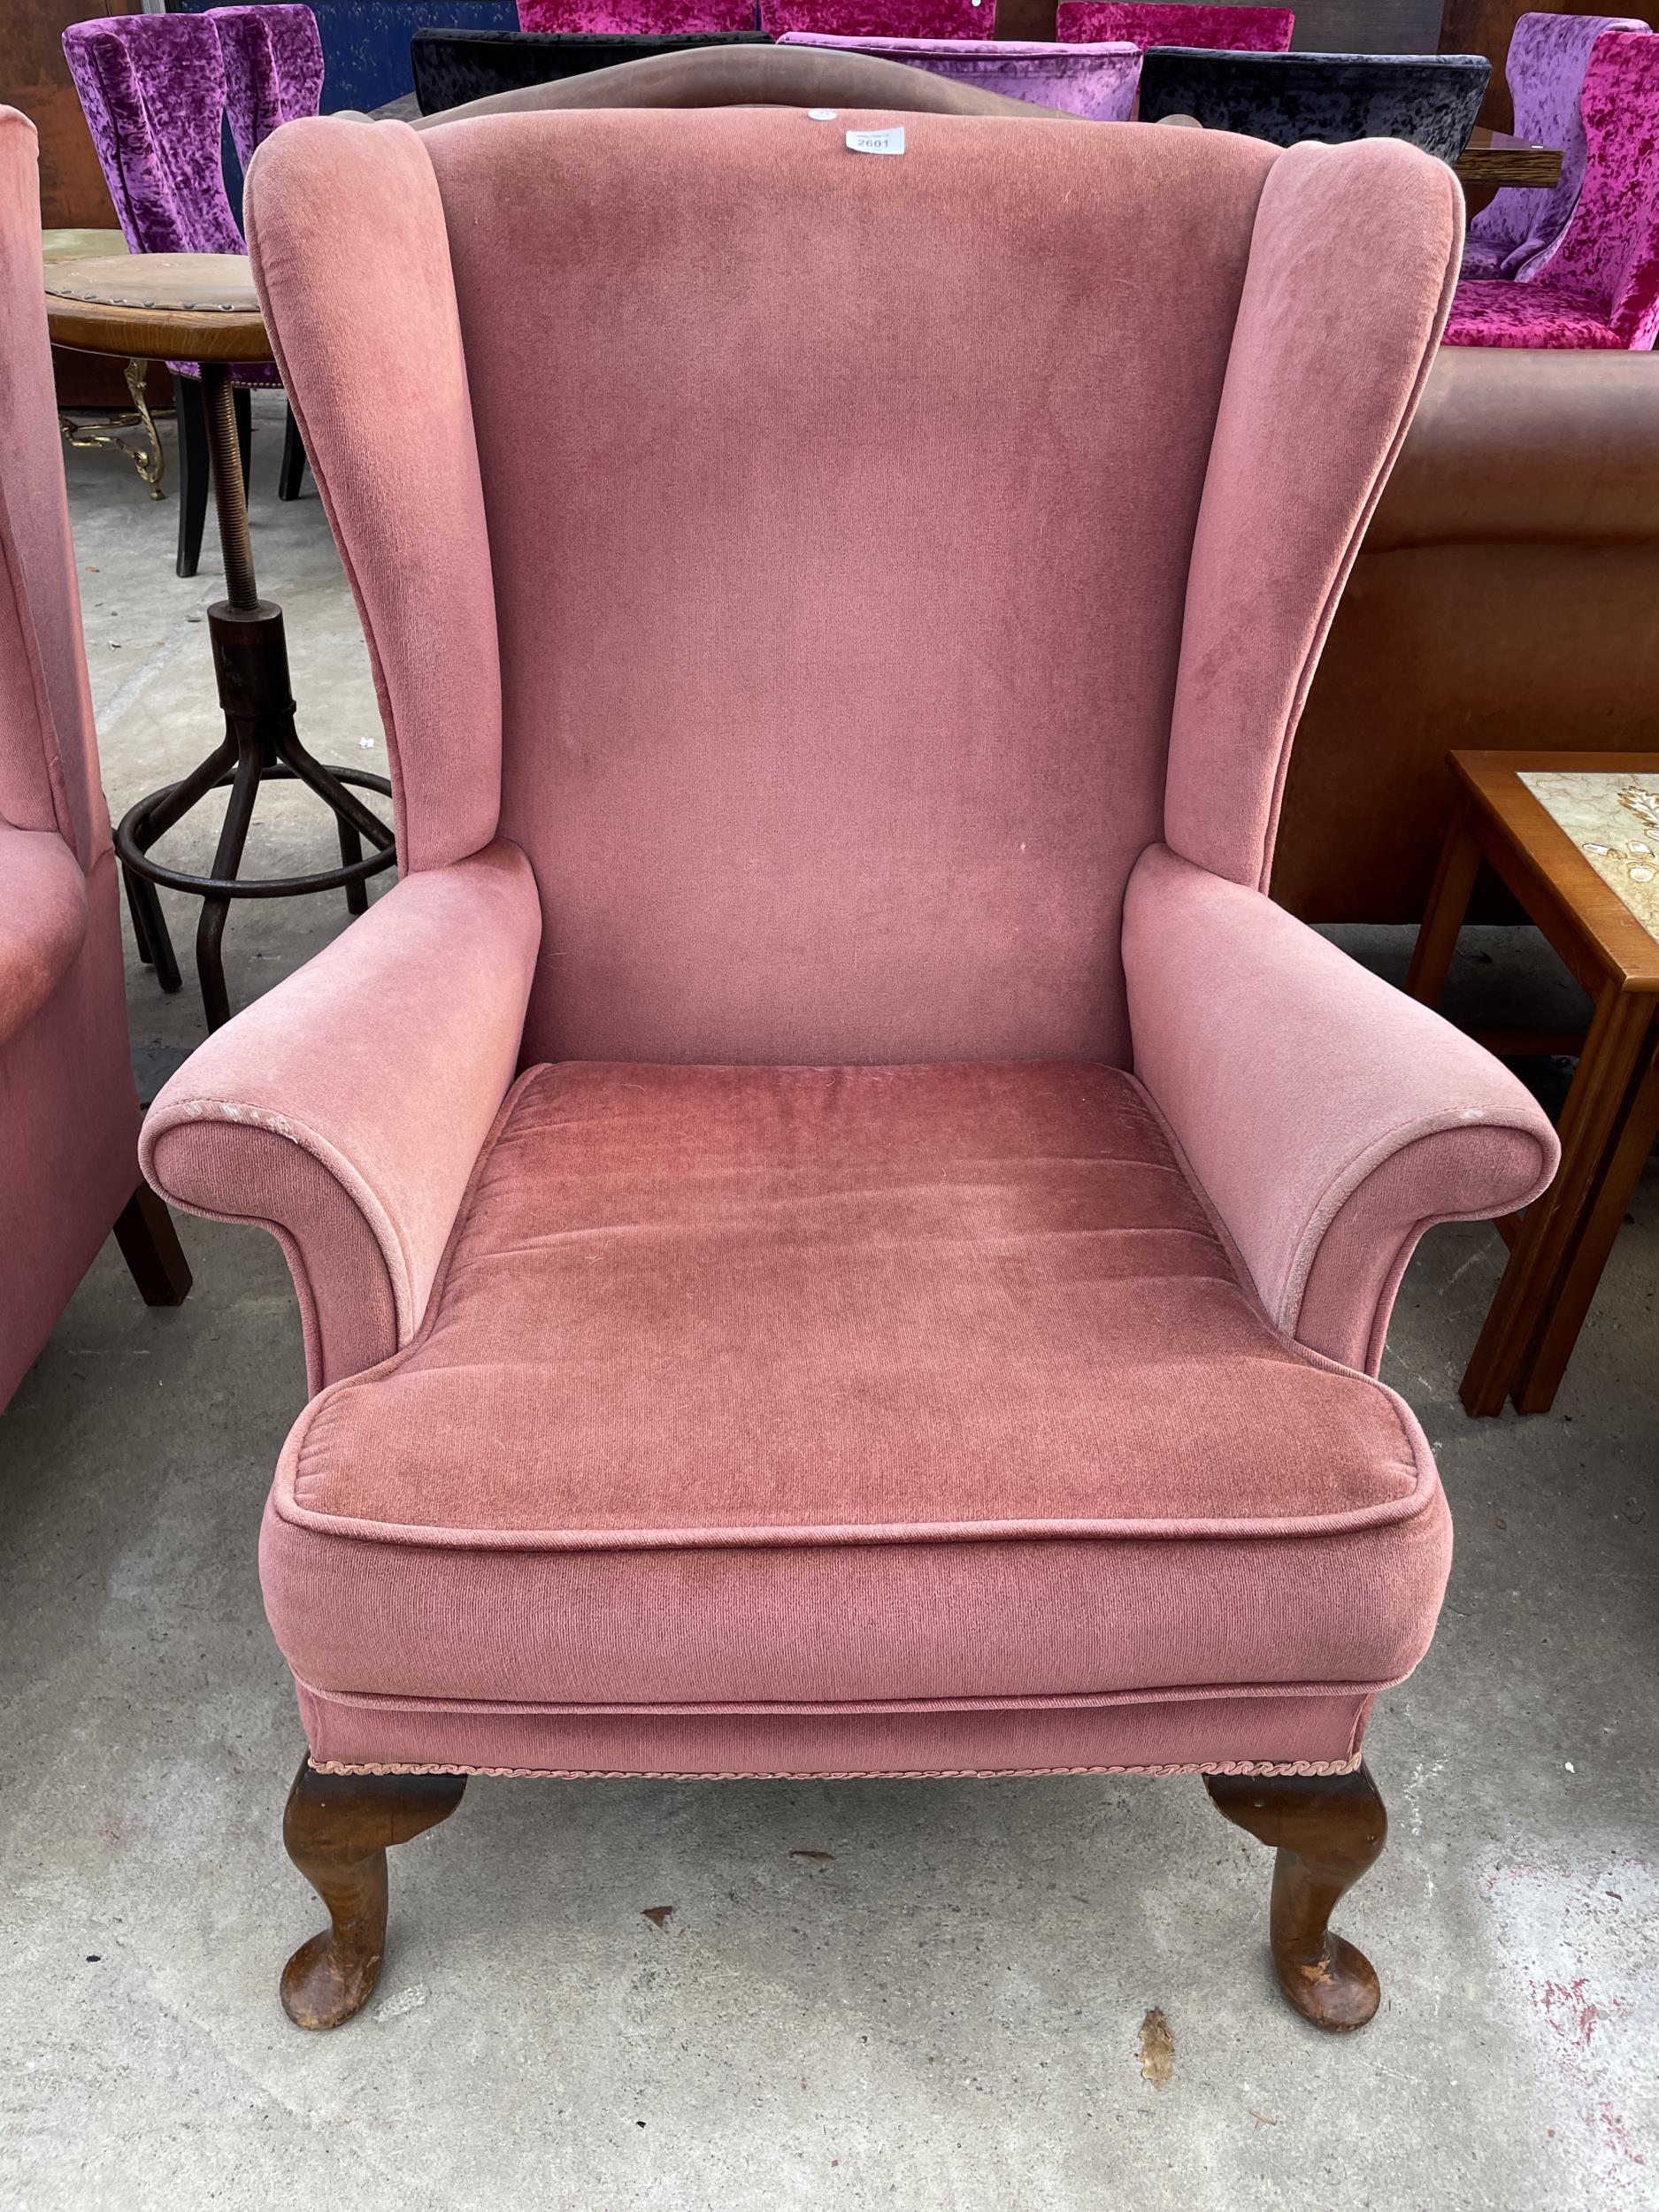 A PARKER KNOLL WINGED CHAIR MODEL NO. PK.720/45 MK.3